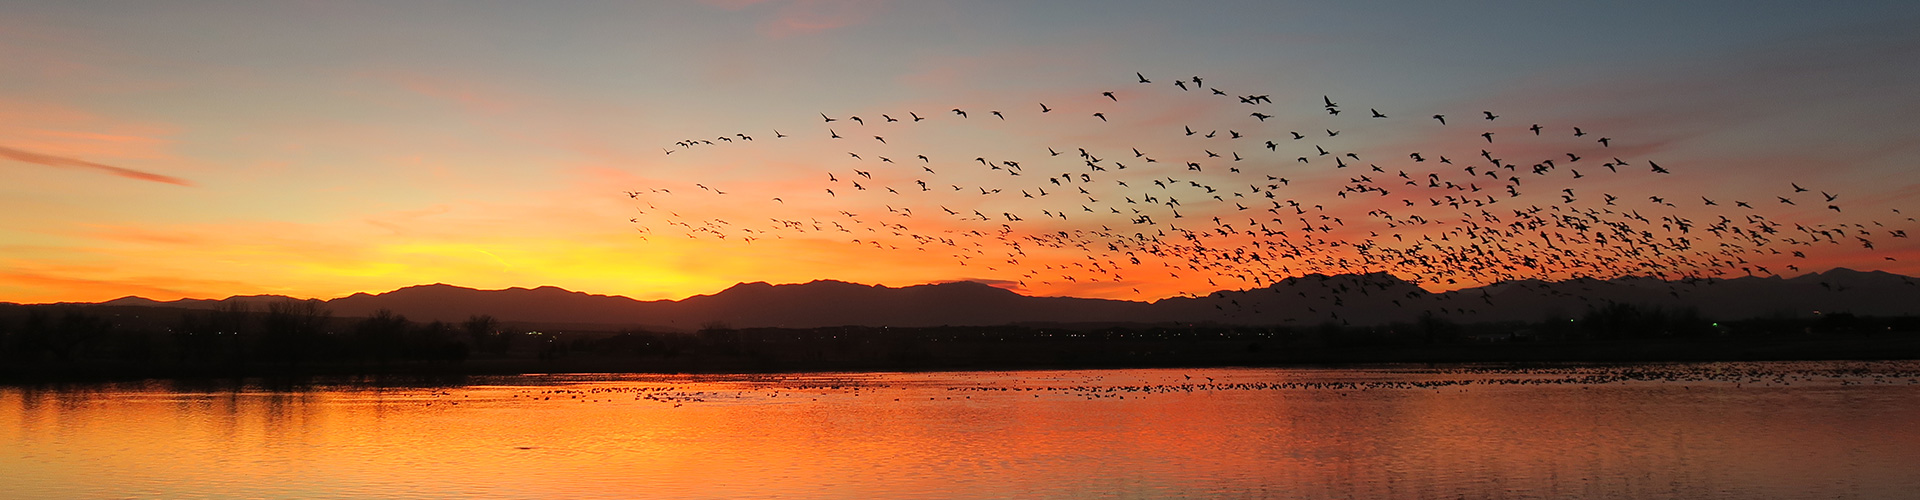 Birds flying over a lake at sunset